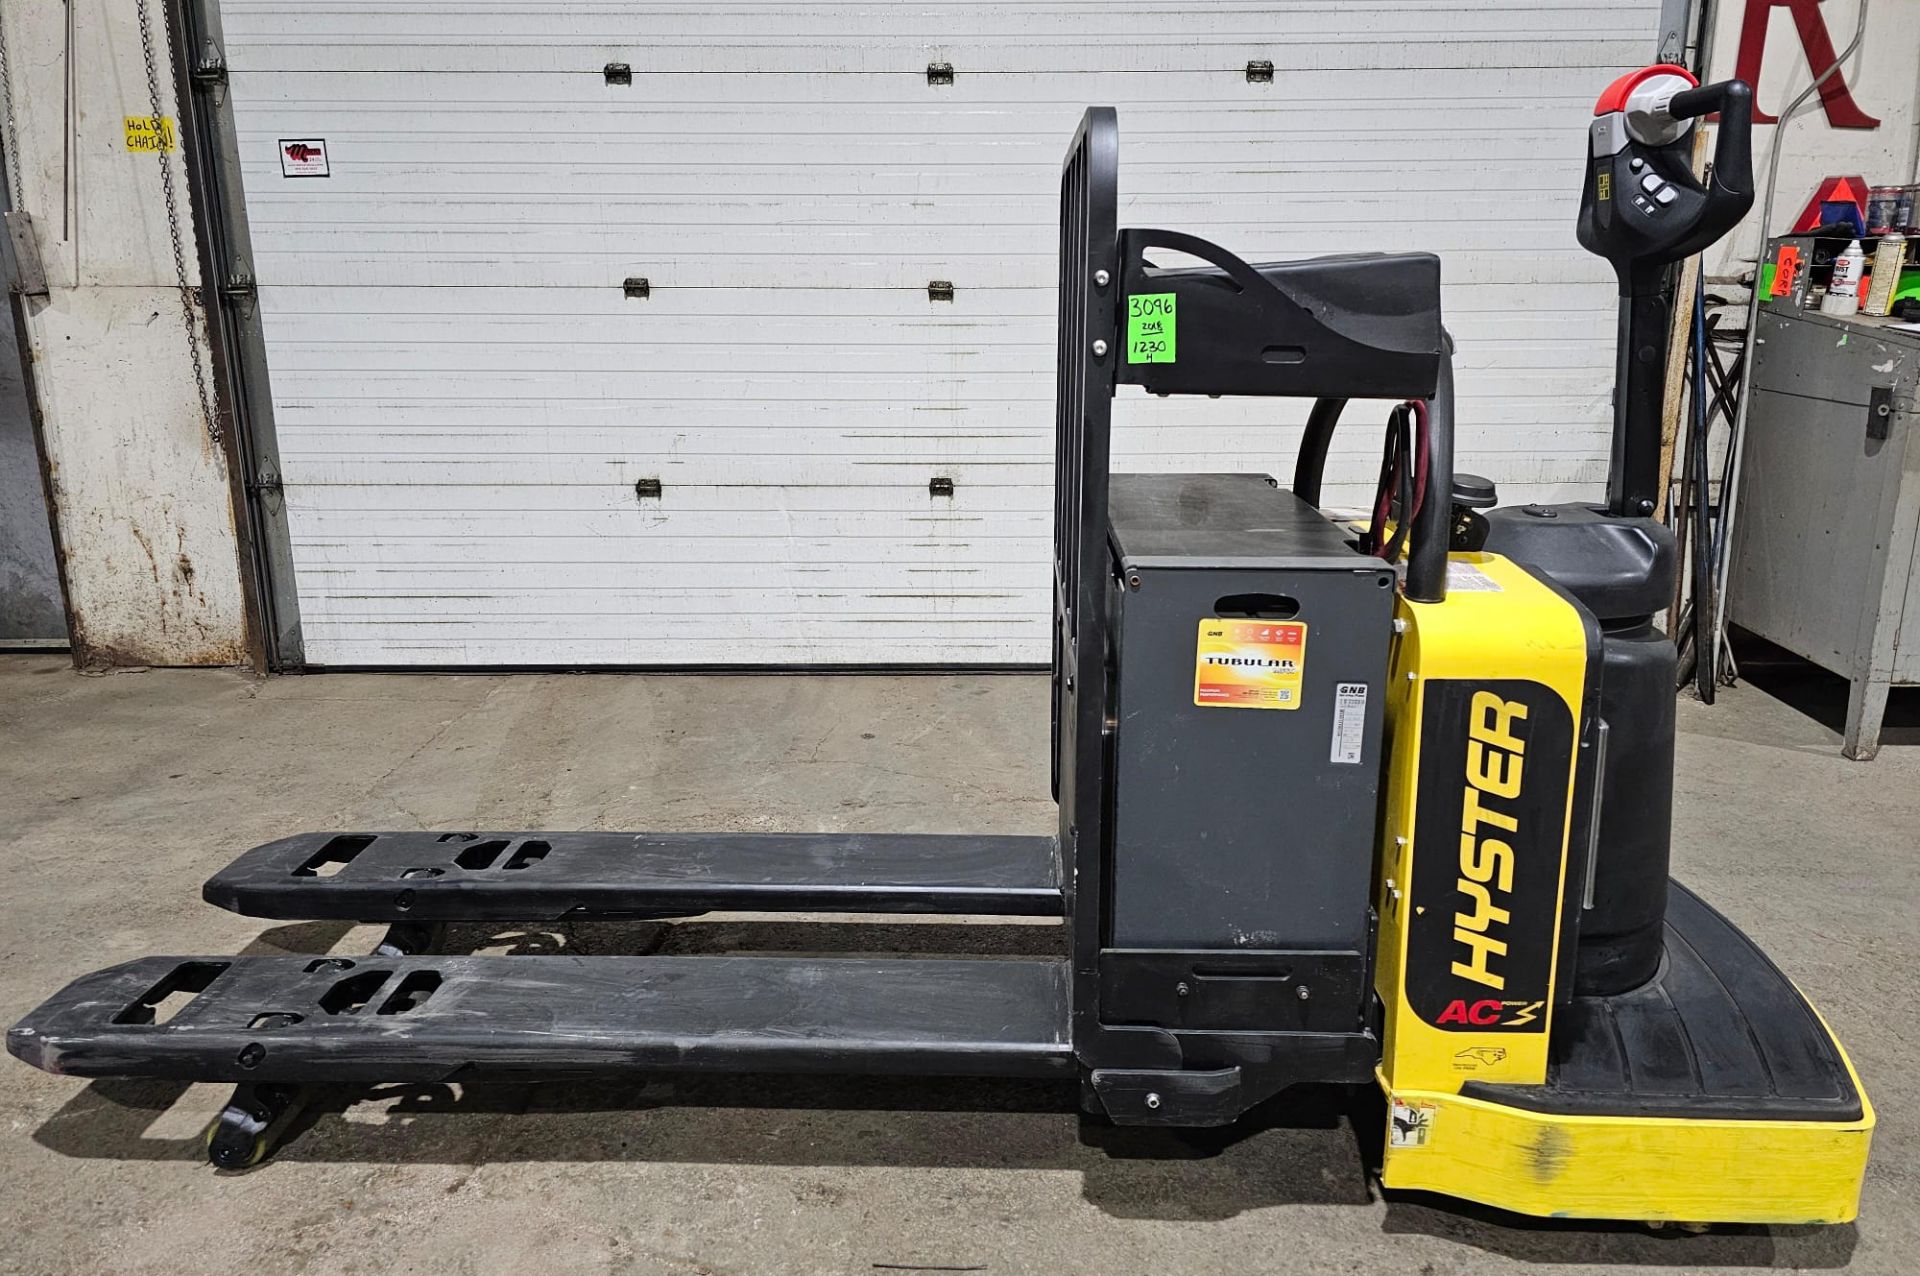 2018 Hyster Ride-On Walkie 8,000lbs Capacity 60" Forks Electric Pallet Cart with CHARGER - Image 2 of 11